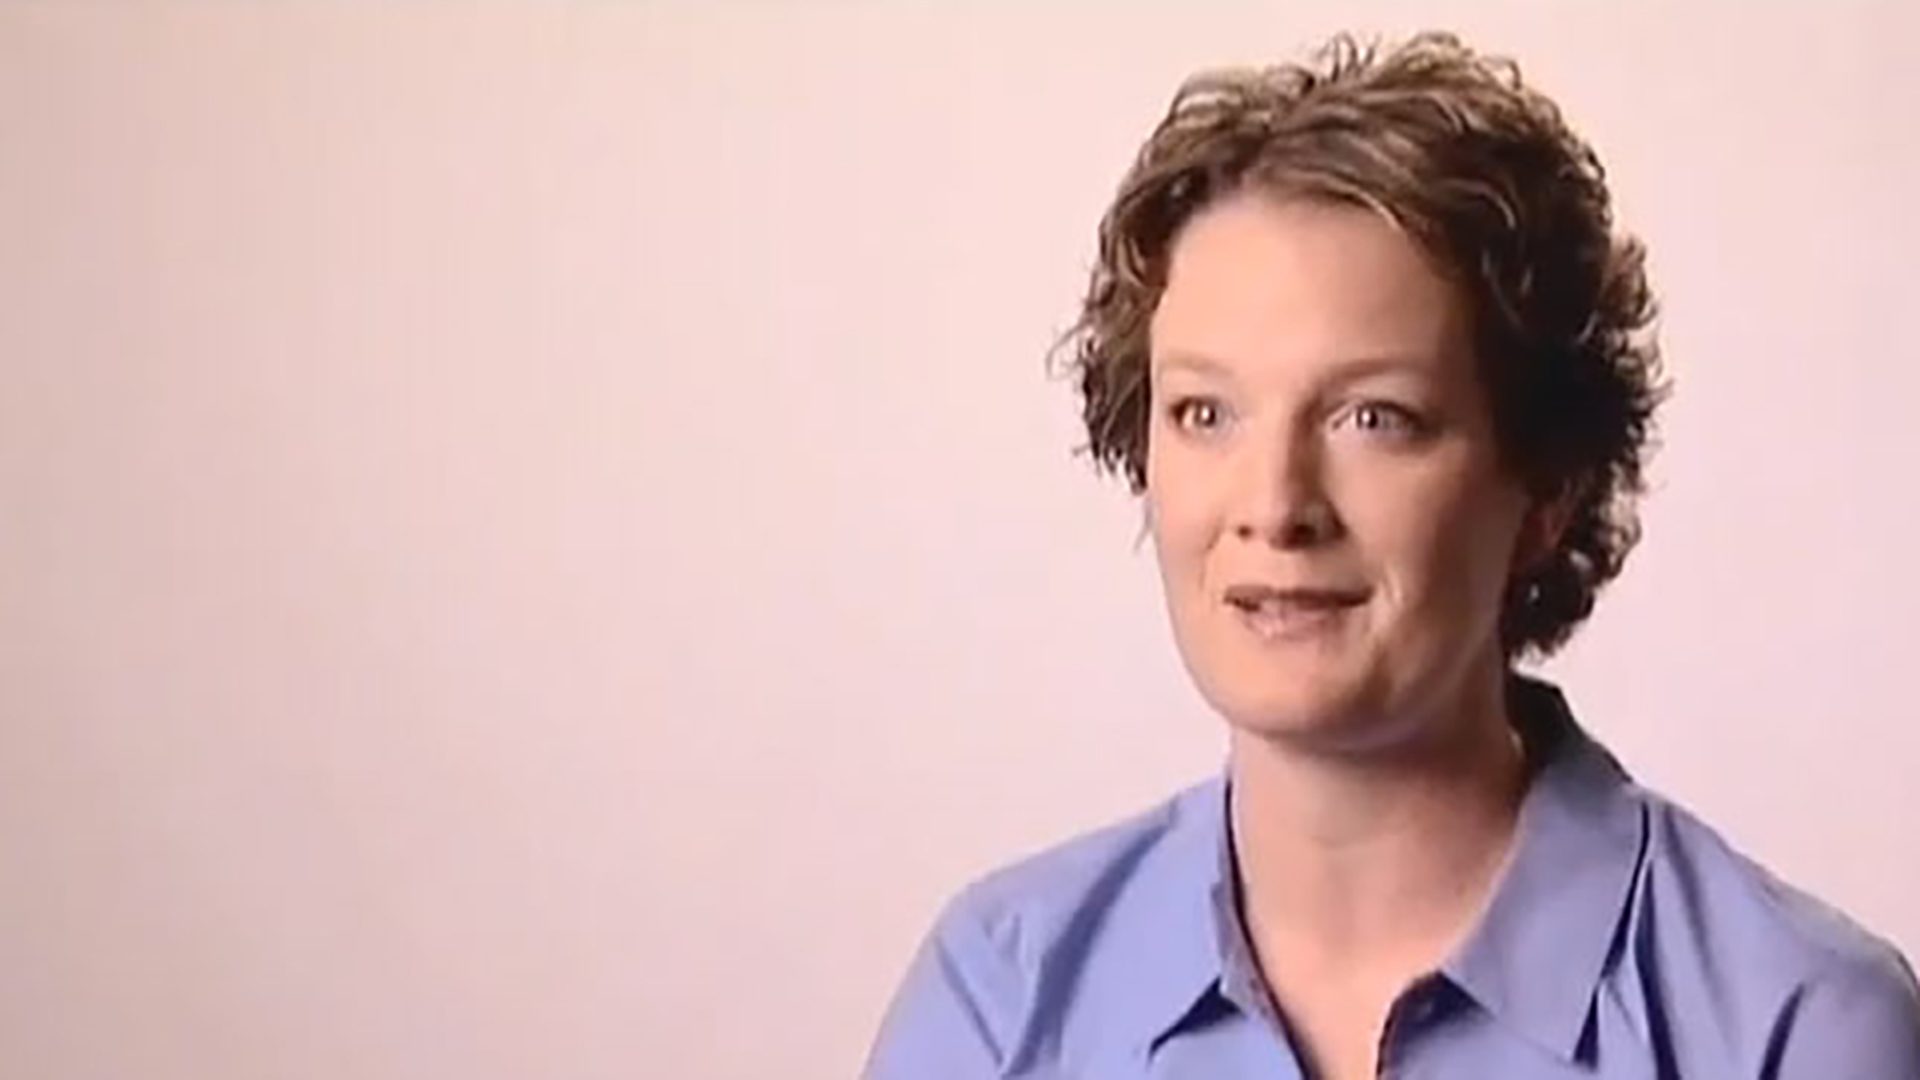 A woman with short curly hair wearing a light blue button-down shirt is interviewed against a light background.